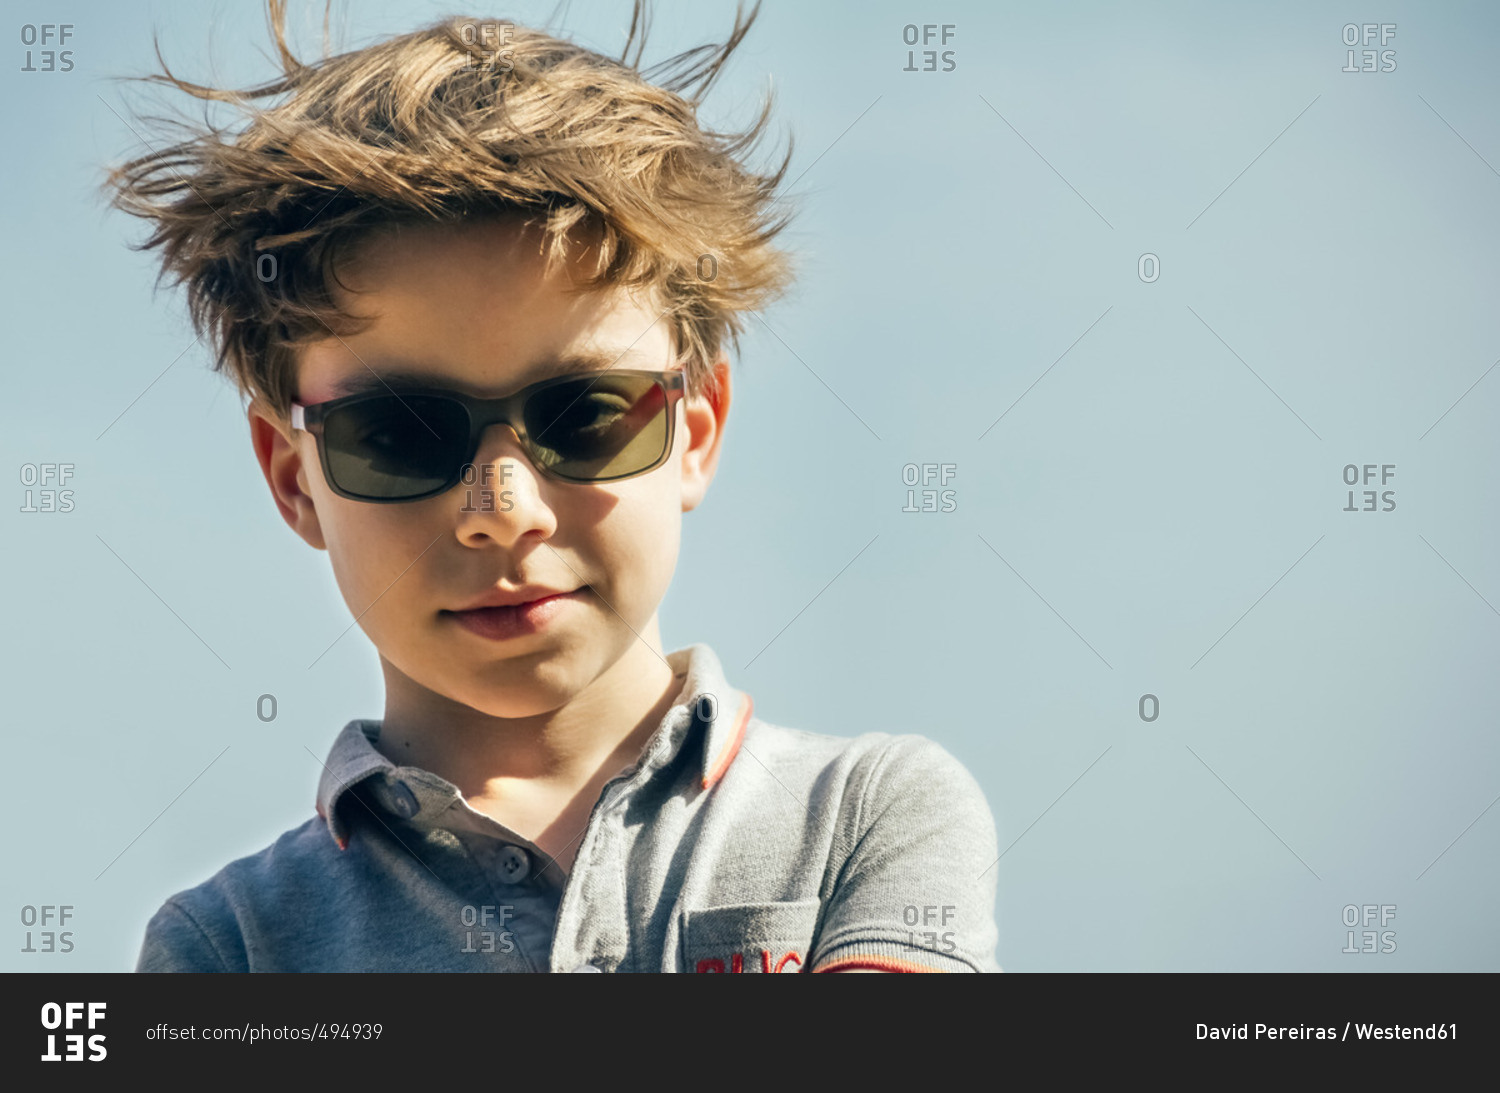 Portrait of cool boy with sunglasses and blowing hair in front of sky